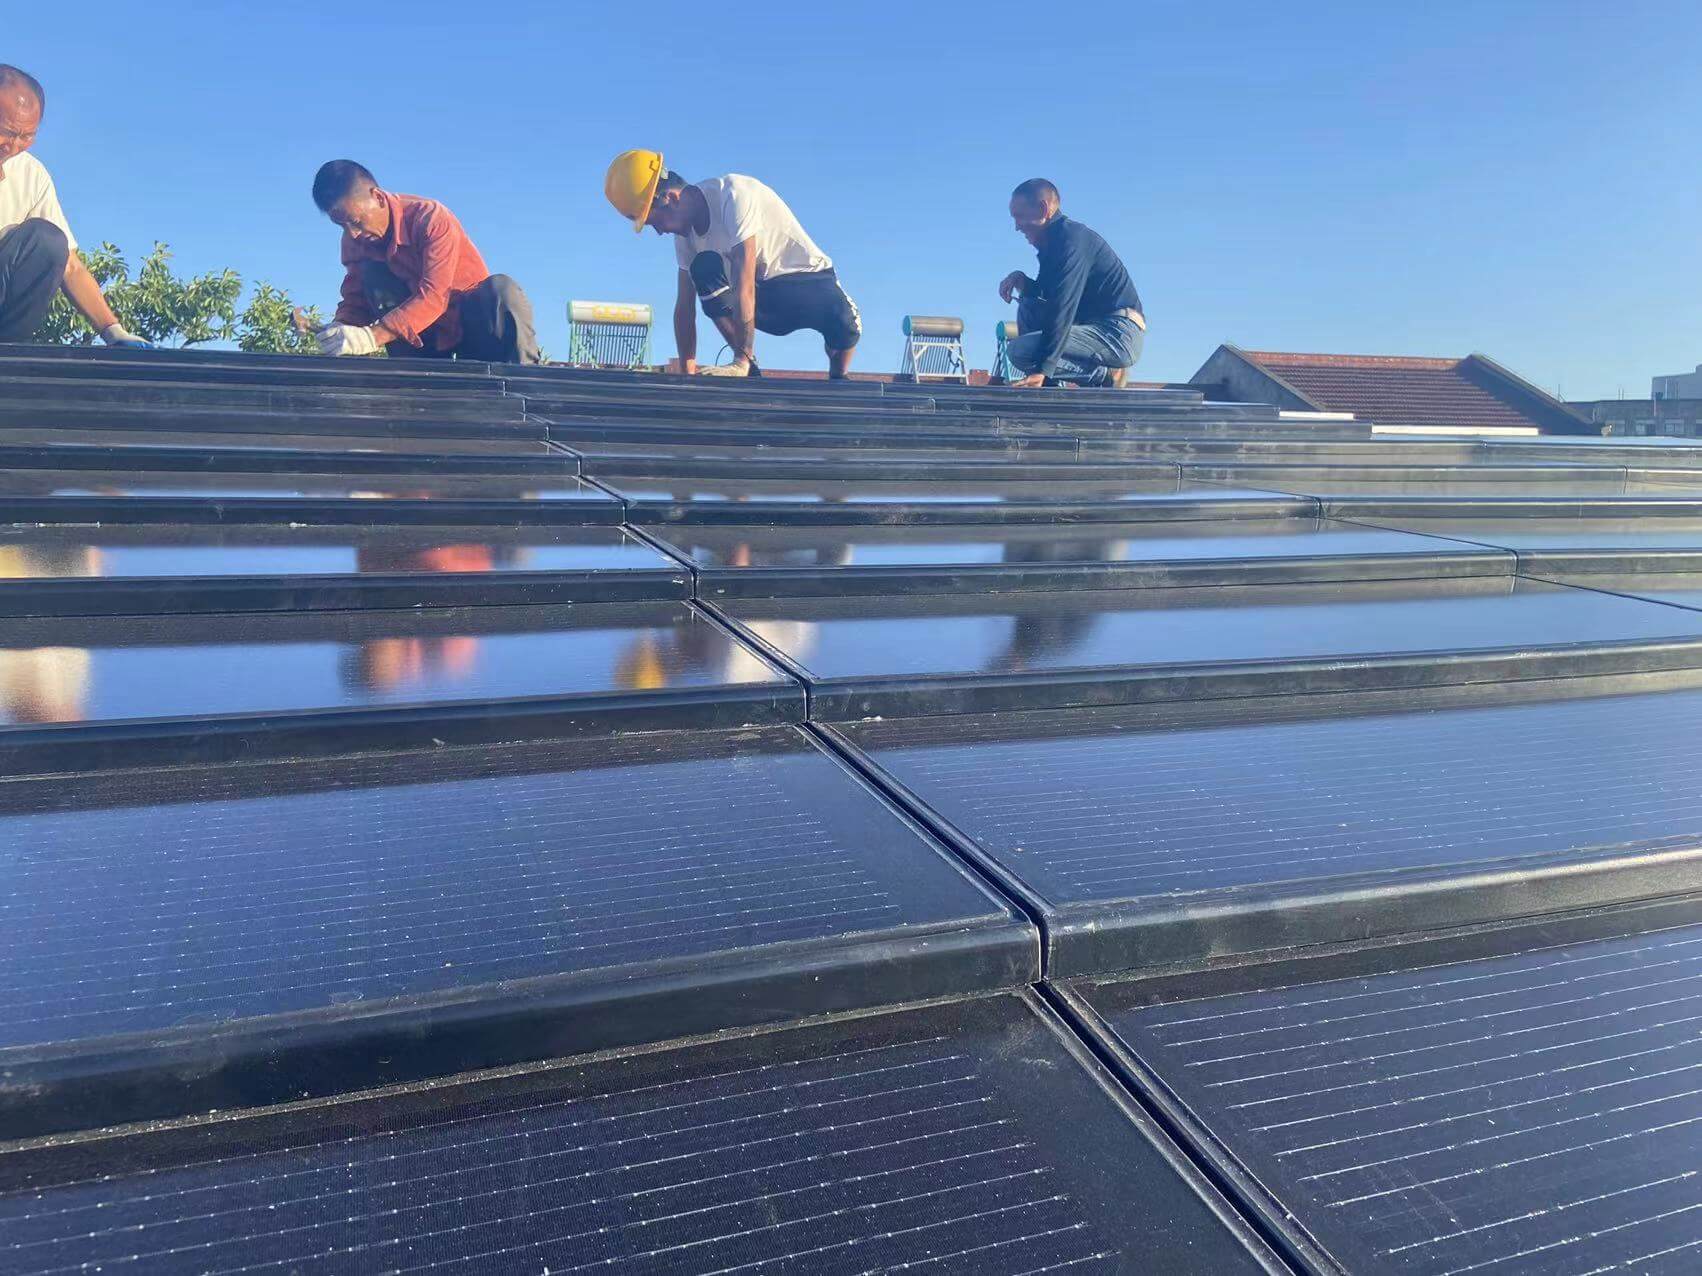 I love that my customers can get a new roof AND solar at the same time, from one source… R E Roofing. As a roofer, I’m committed to giving my customers a roof that looks good and protects them from the elements. And by getting the roof and solar from us, I’m not dealing with follow-up calls from one of my customers about punctures in the shingles from a rack-mounted solar system. This is one sleek, integrated design that all works together.